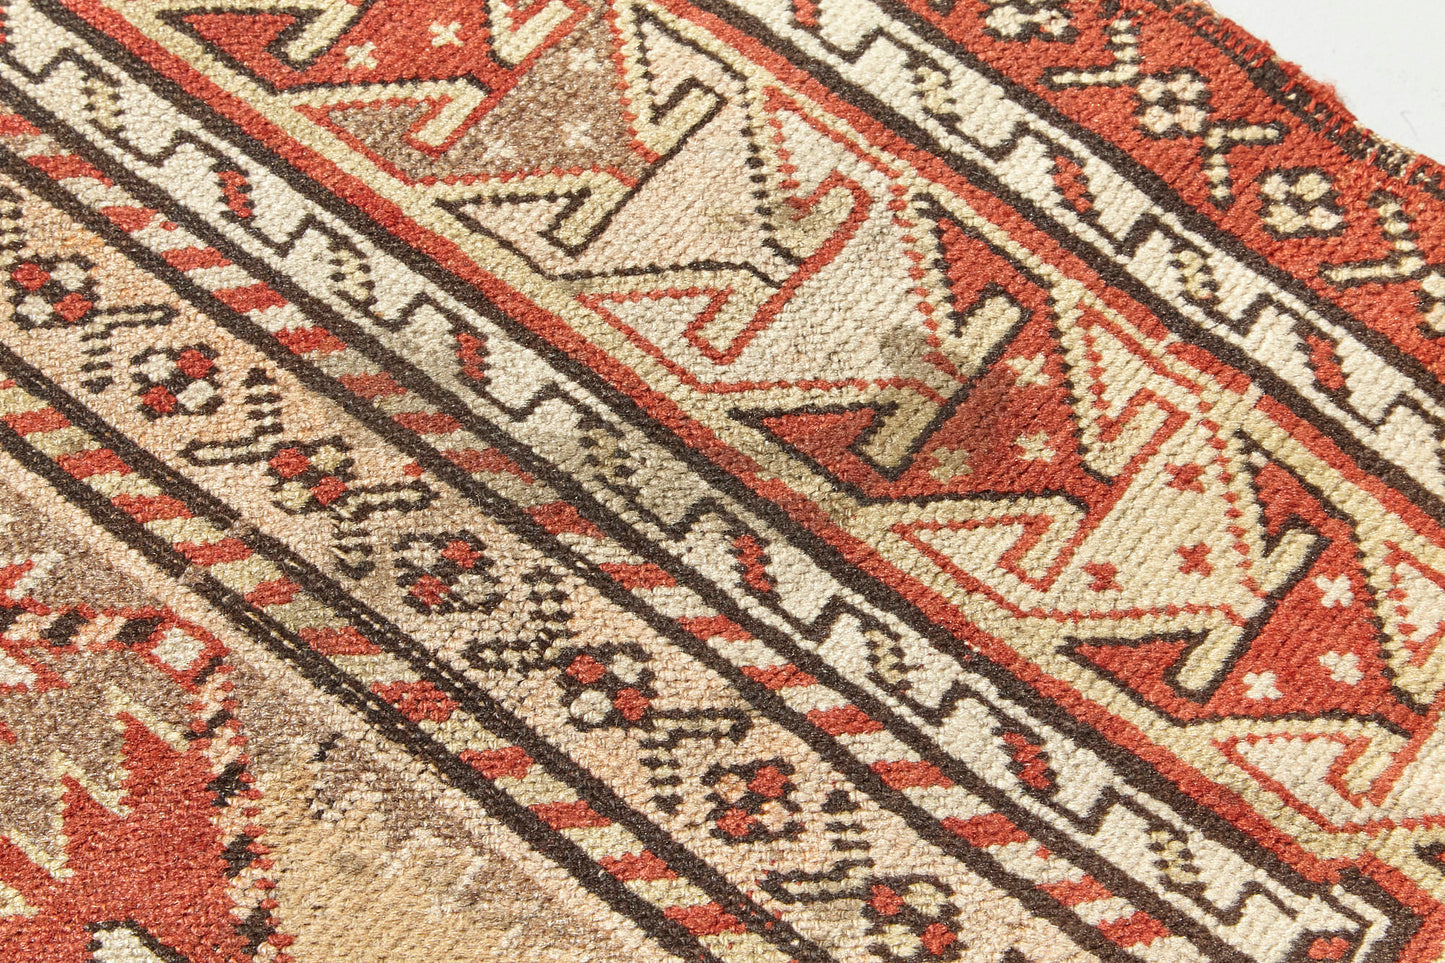 Detail of hand woven antique Shirvan Prayer rug, beige tan base with red, peach and brown designs throughout. Perfect for a bedroom, office, living room or as a wall hanging - Available from King Kennedy Rugs Los Angeles